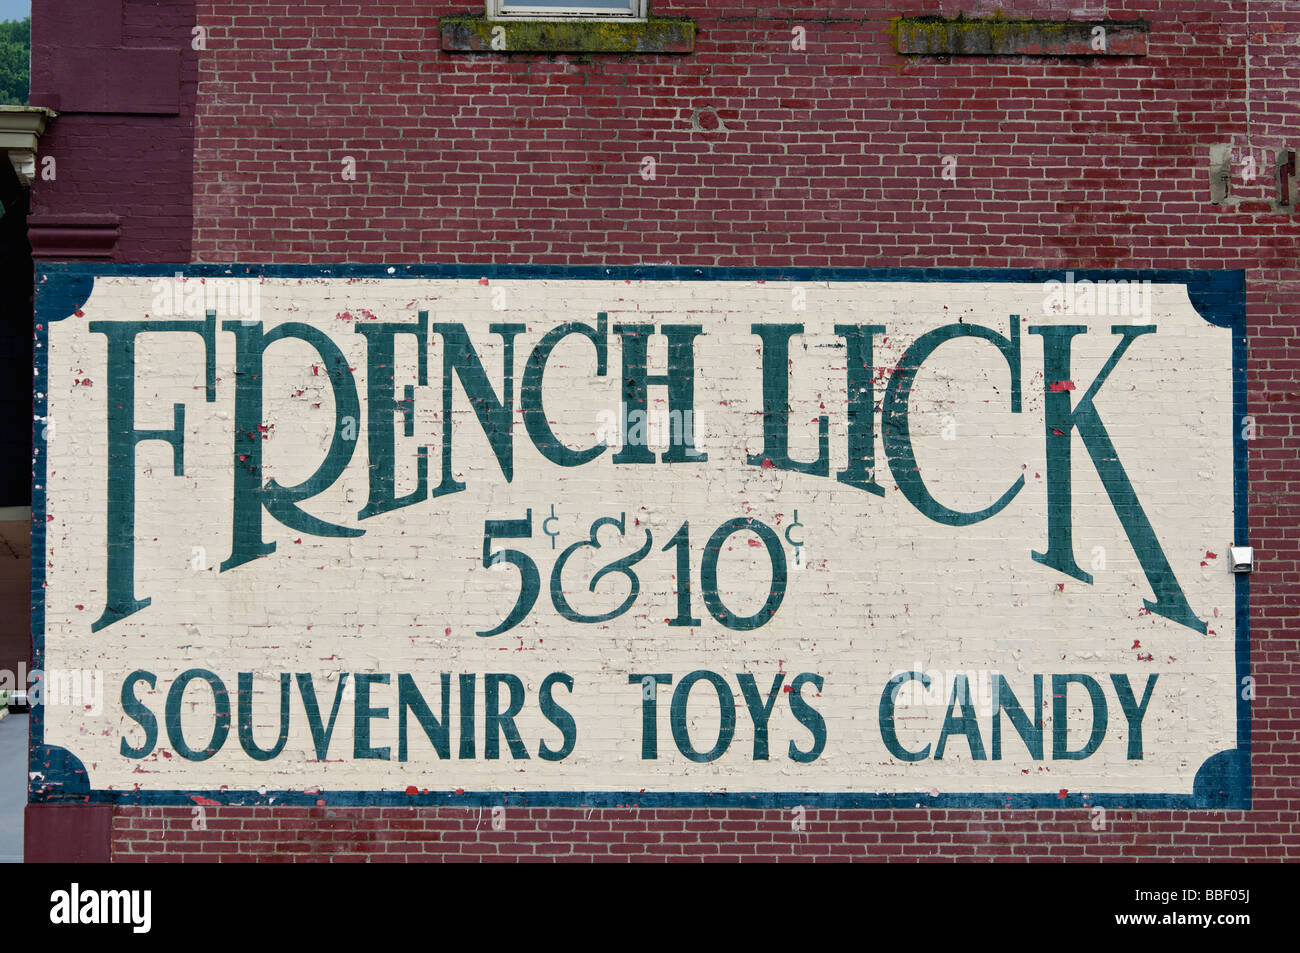 Image result for french lick sign pics